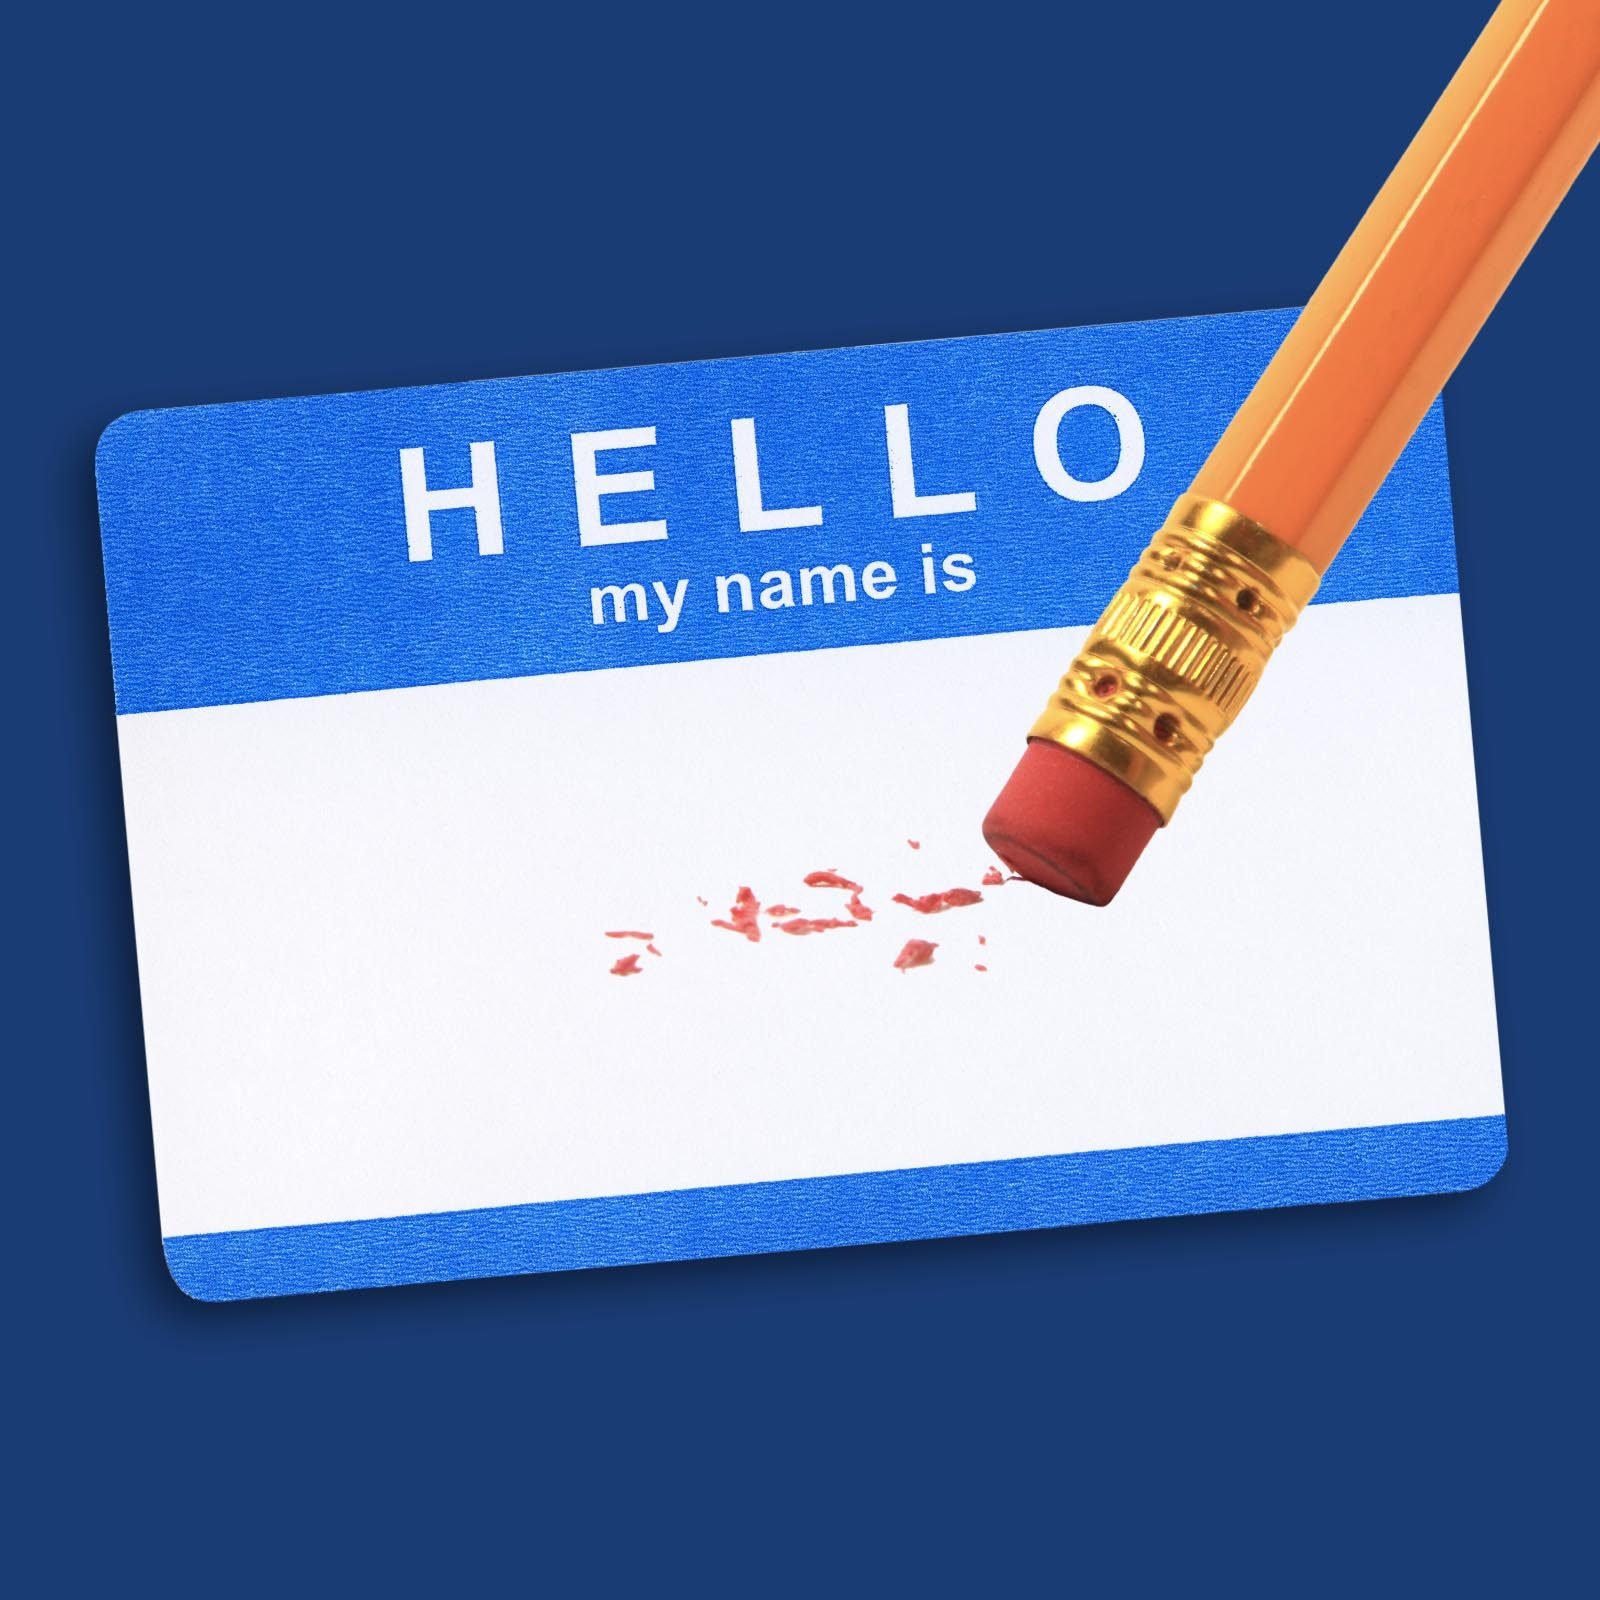 Changing Your Name?  Name Change Made Easy How To Change Your